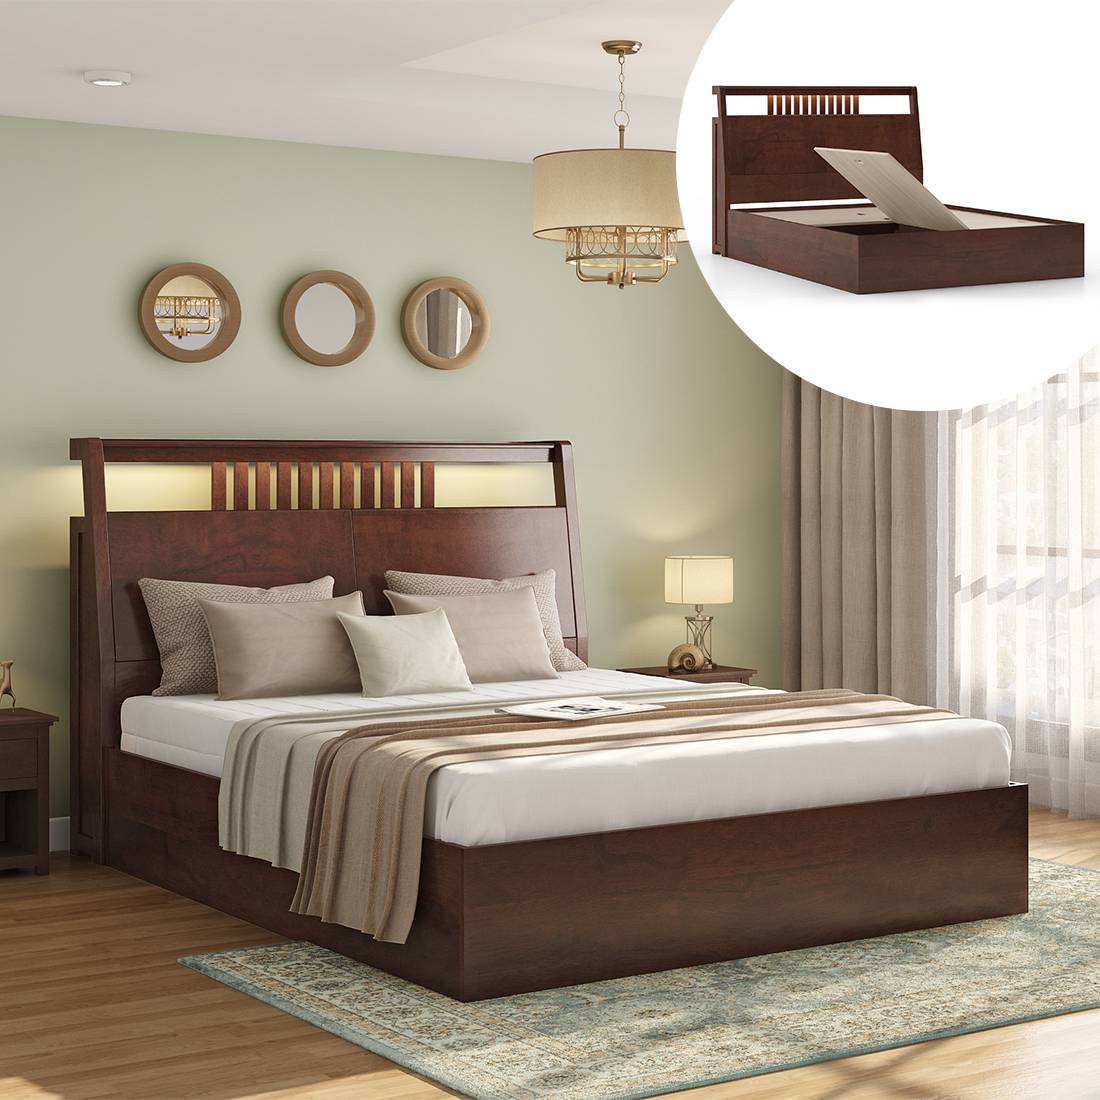 Wooden Bed Design For Bedroom : Doesn't it create a warm, cosy feeling ...